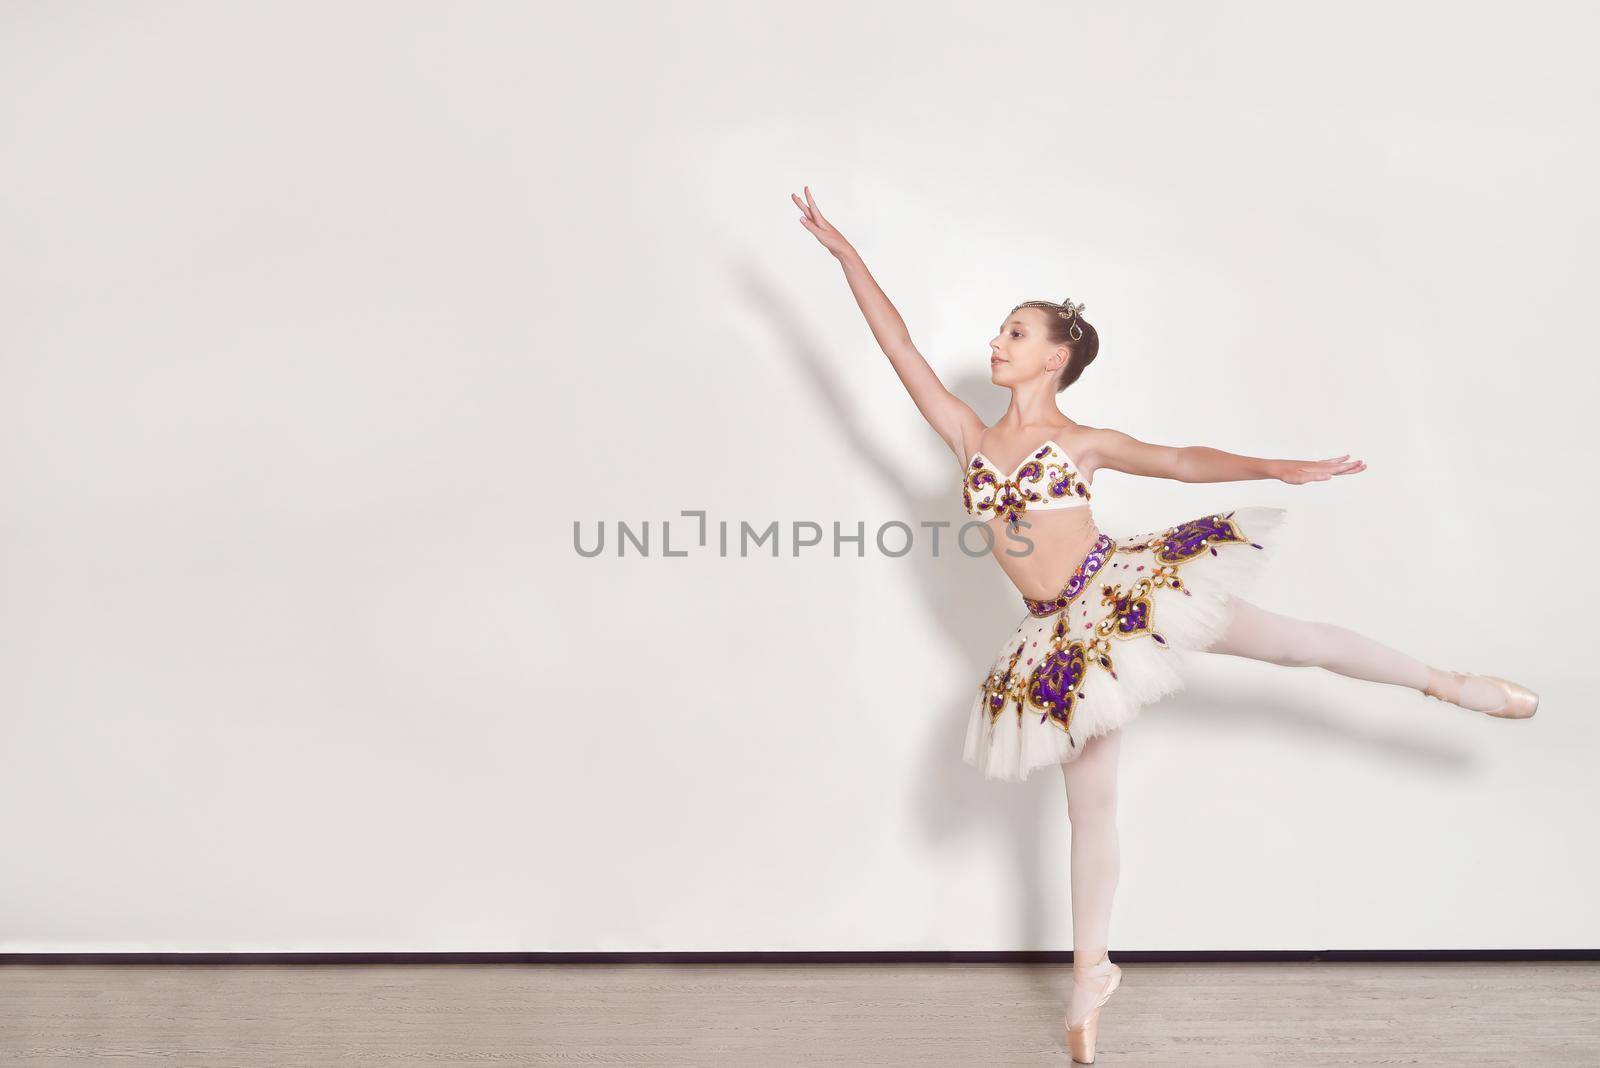 young ballerina performs ballet exercises in the studio against a white background by Nickstock